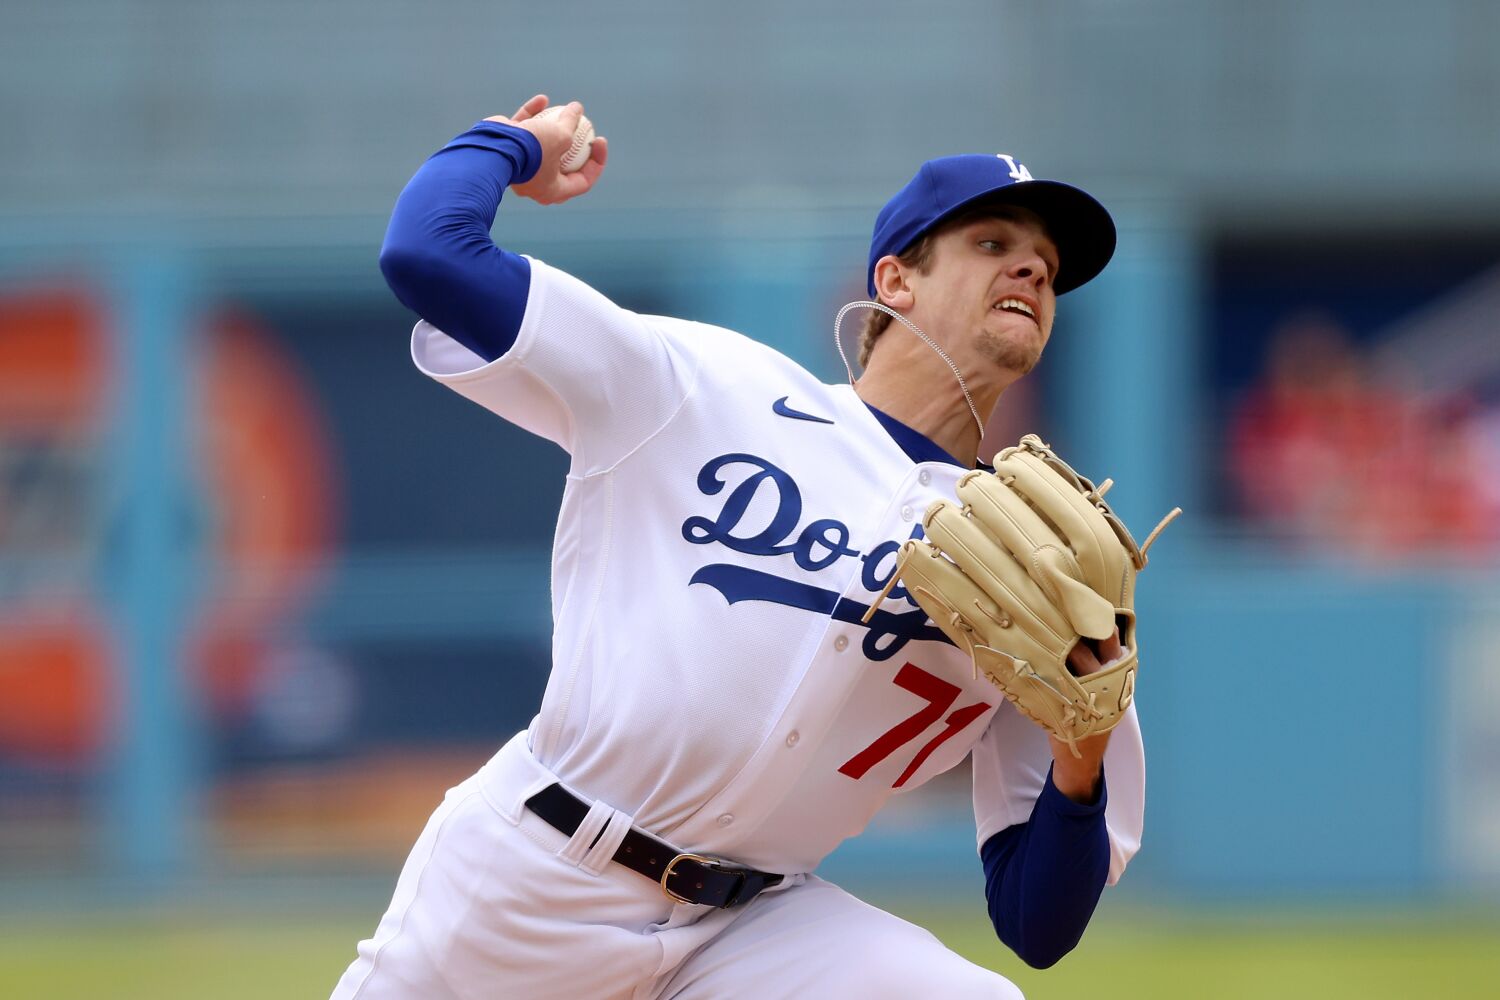 With Dustin May injured, Dodgers' starting rotation depth suddenly looks thin